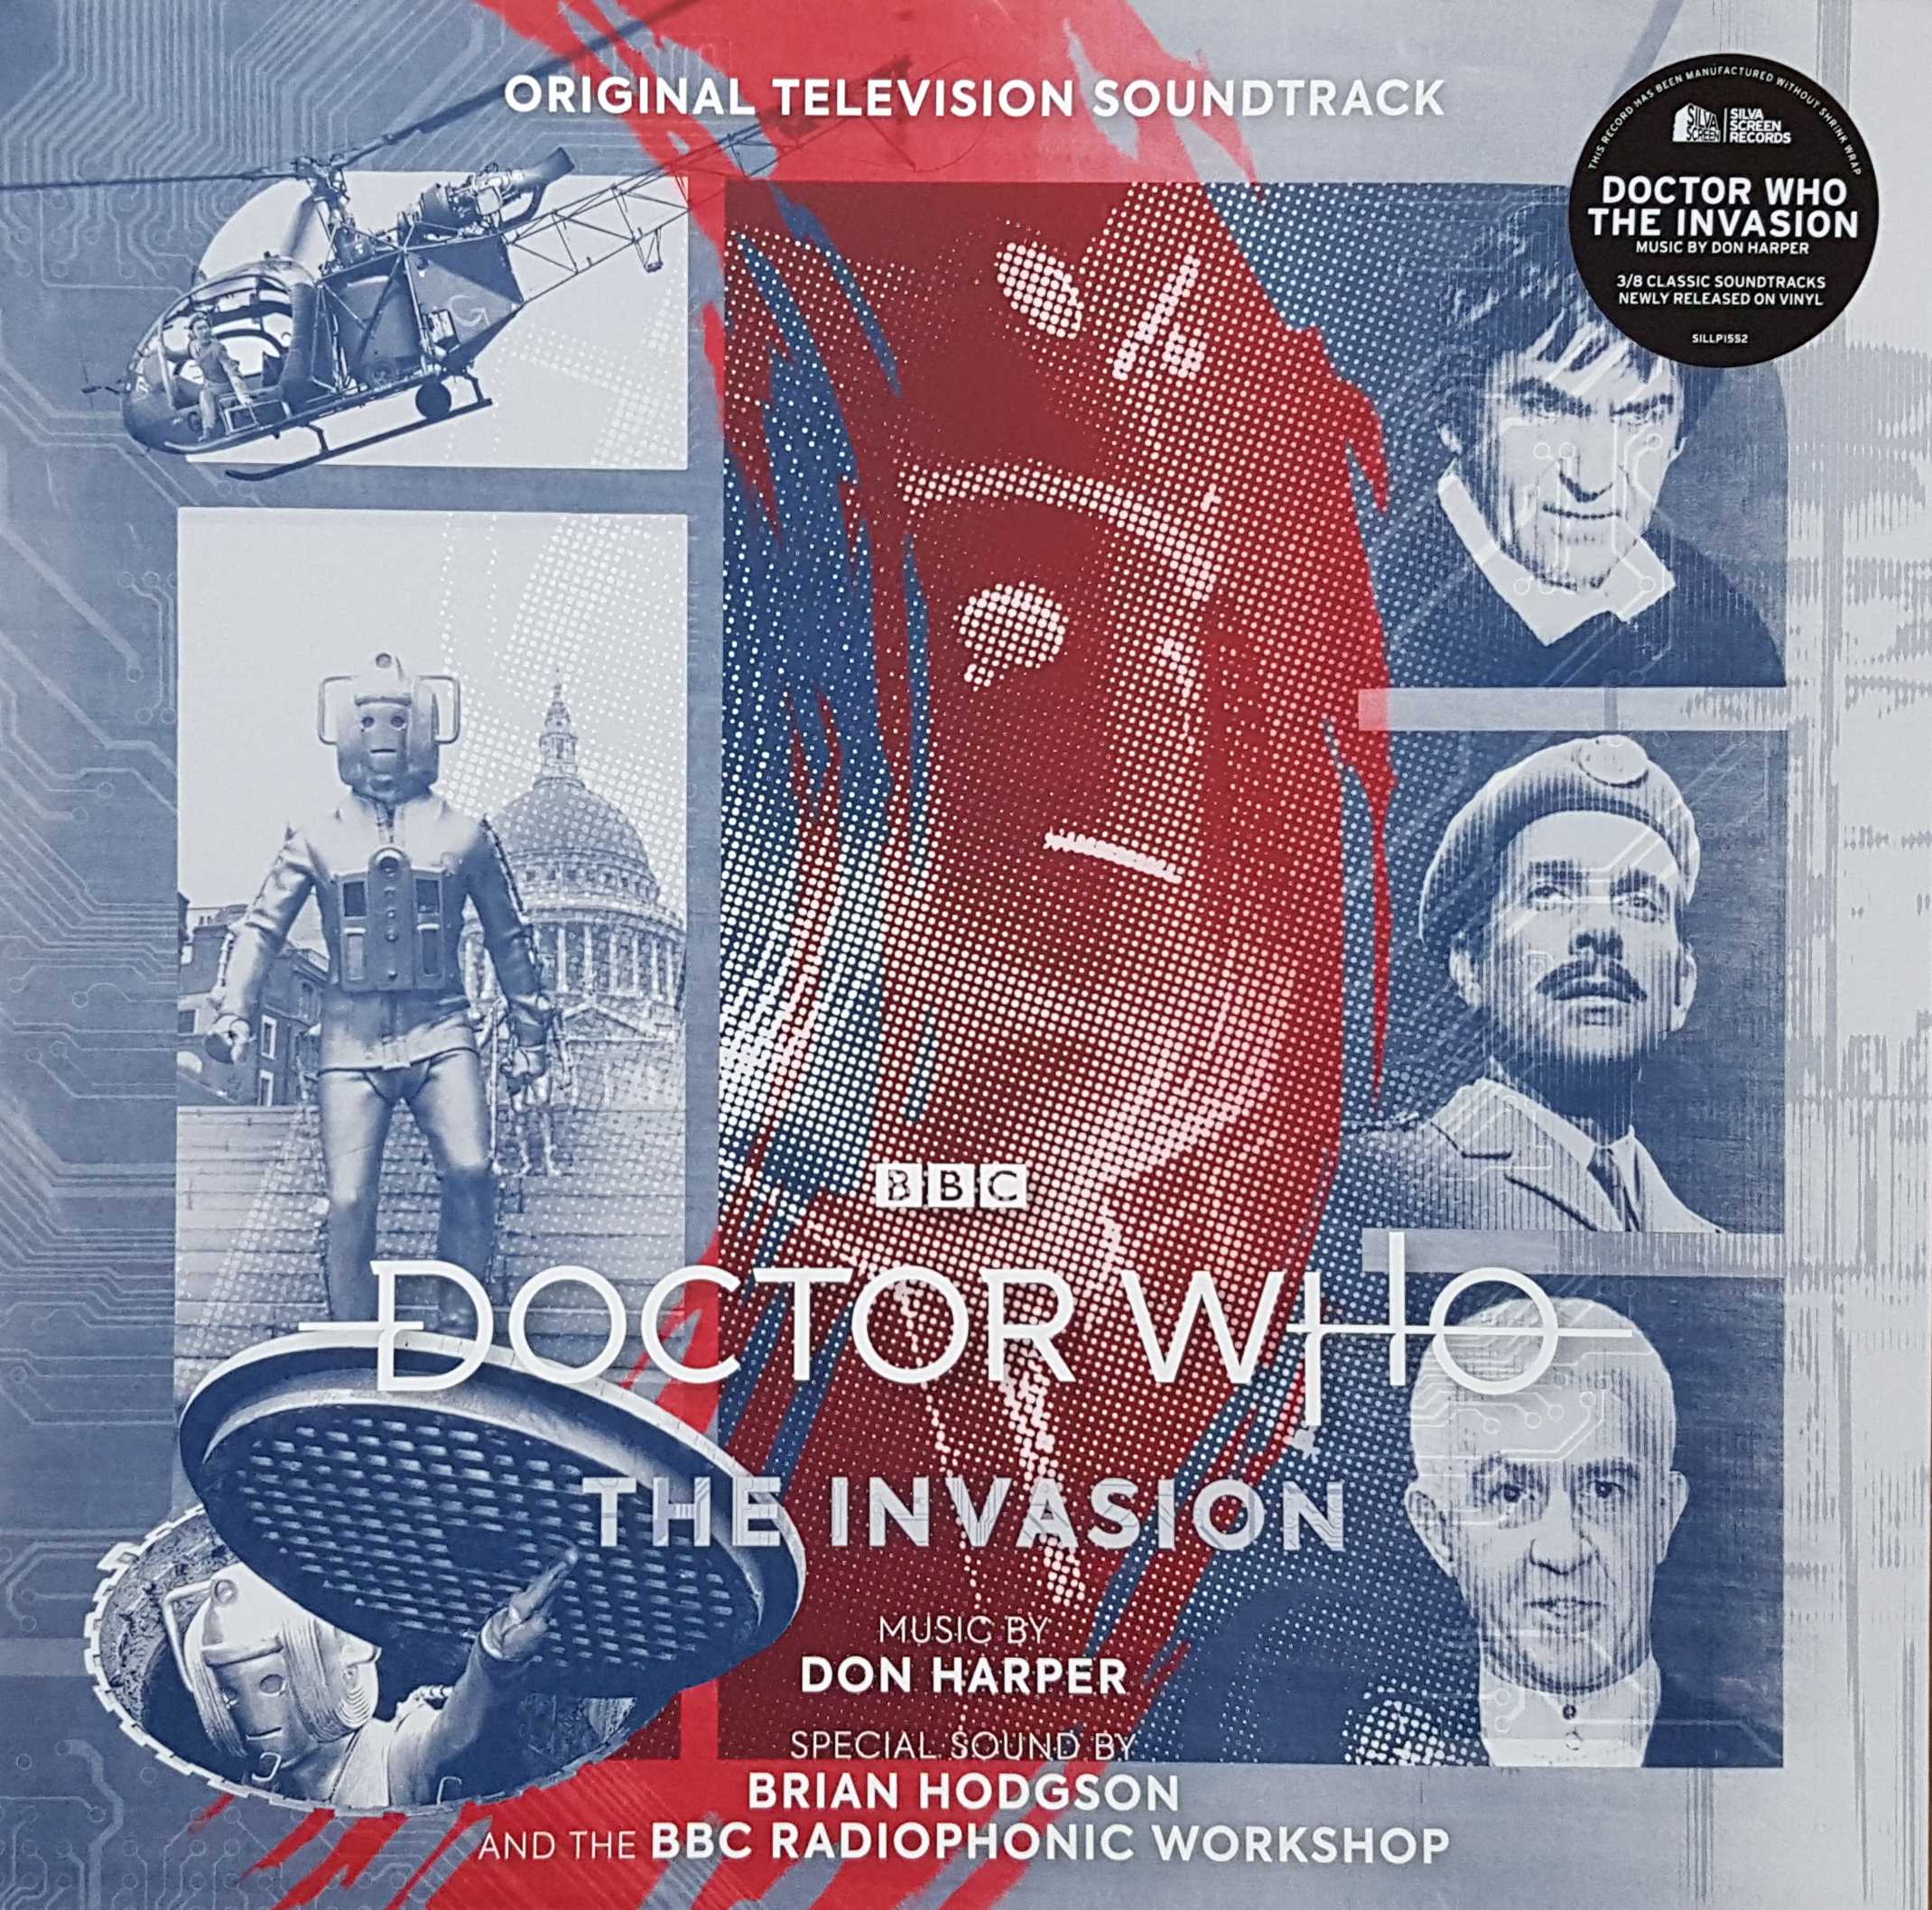 Picture of SILLP 1552 Doctor Who - The invasion by artist Don Harper / Brian Hodgson and the BBC Radiophonic Workshop from the BBC records and Tapes library